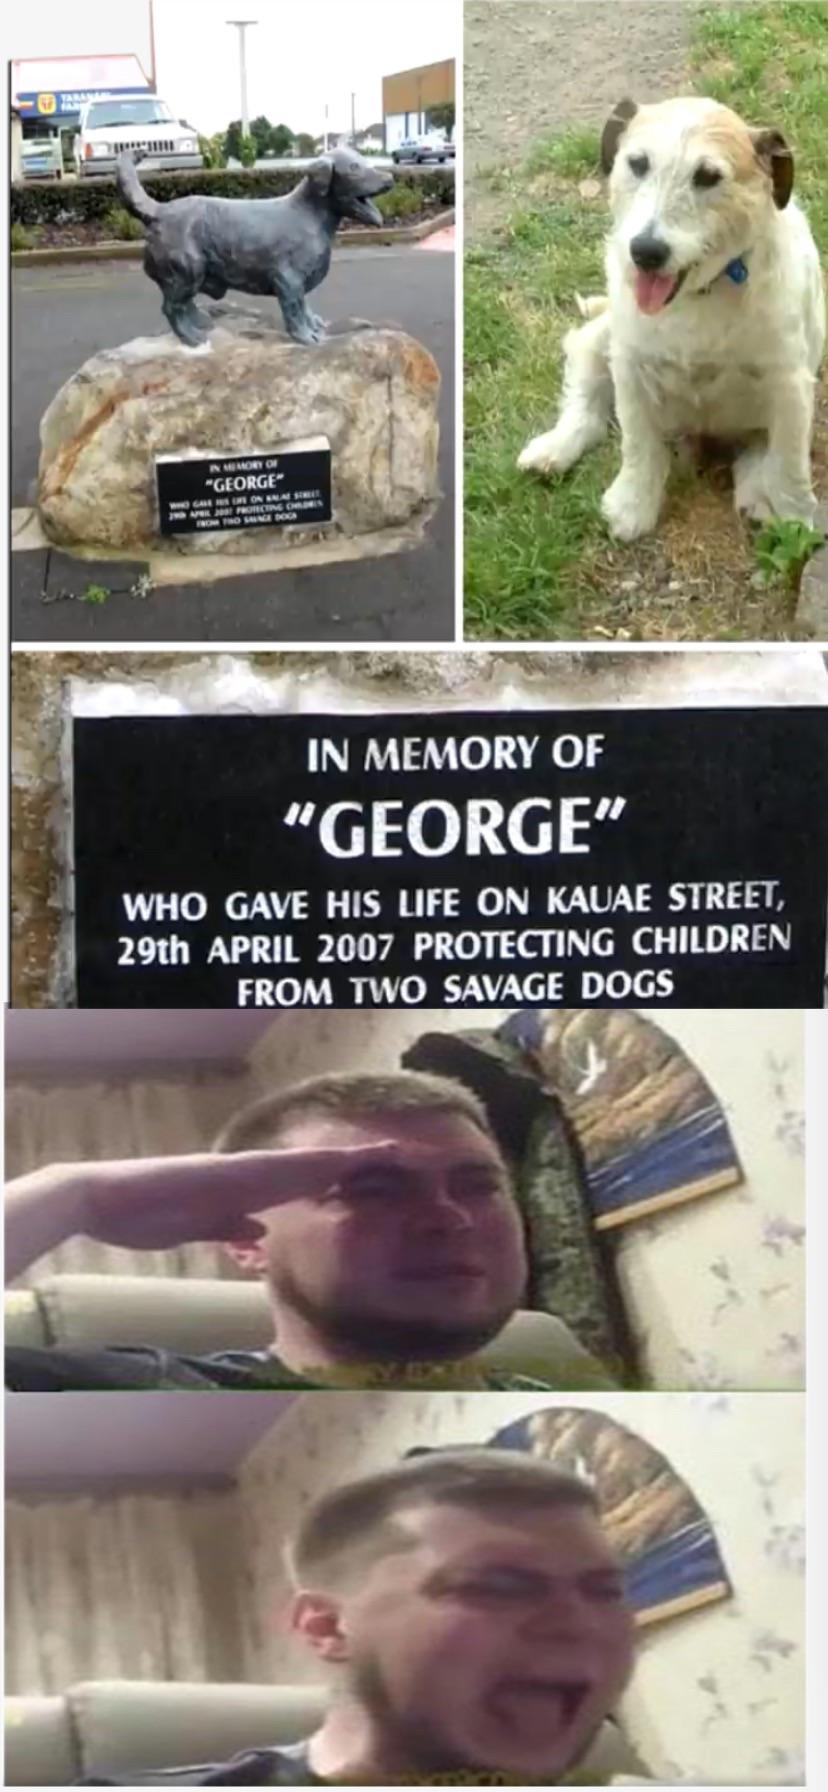 The best F To Pay Respects memes :) Memedroid